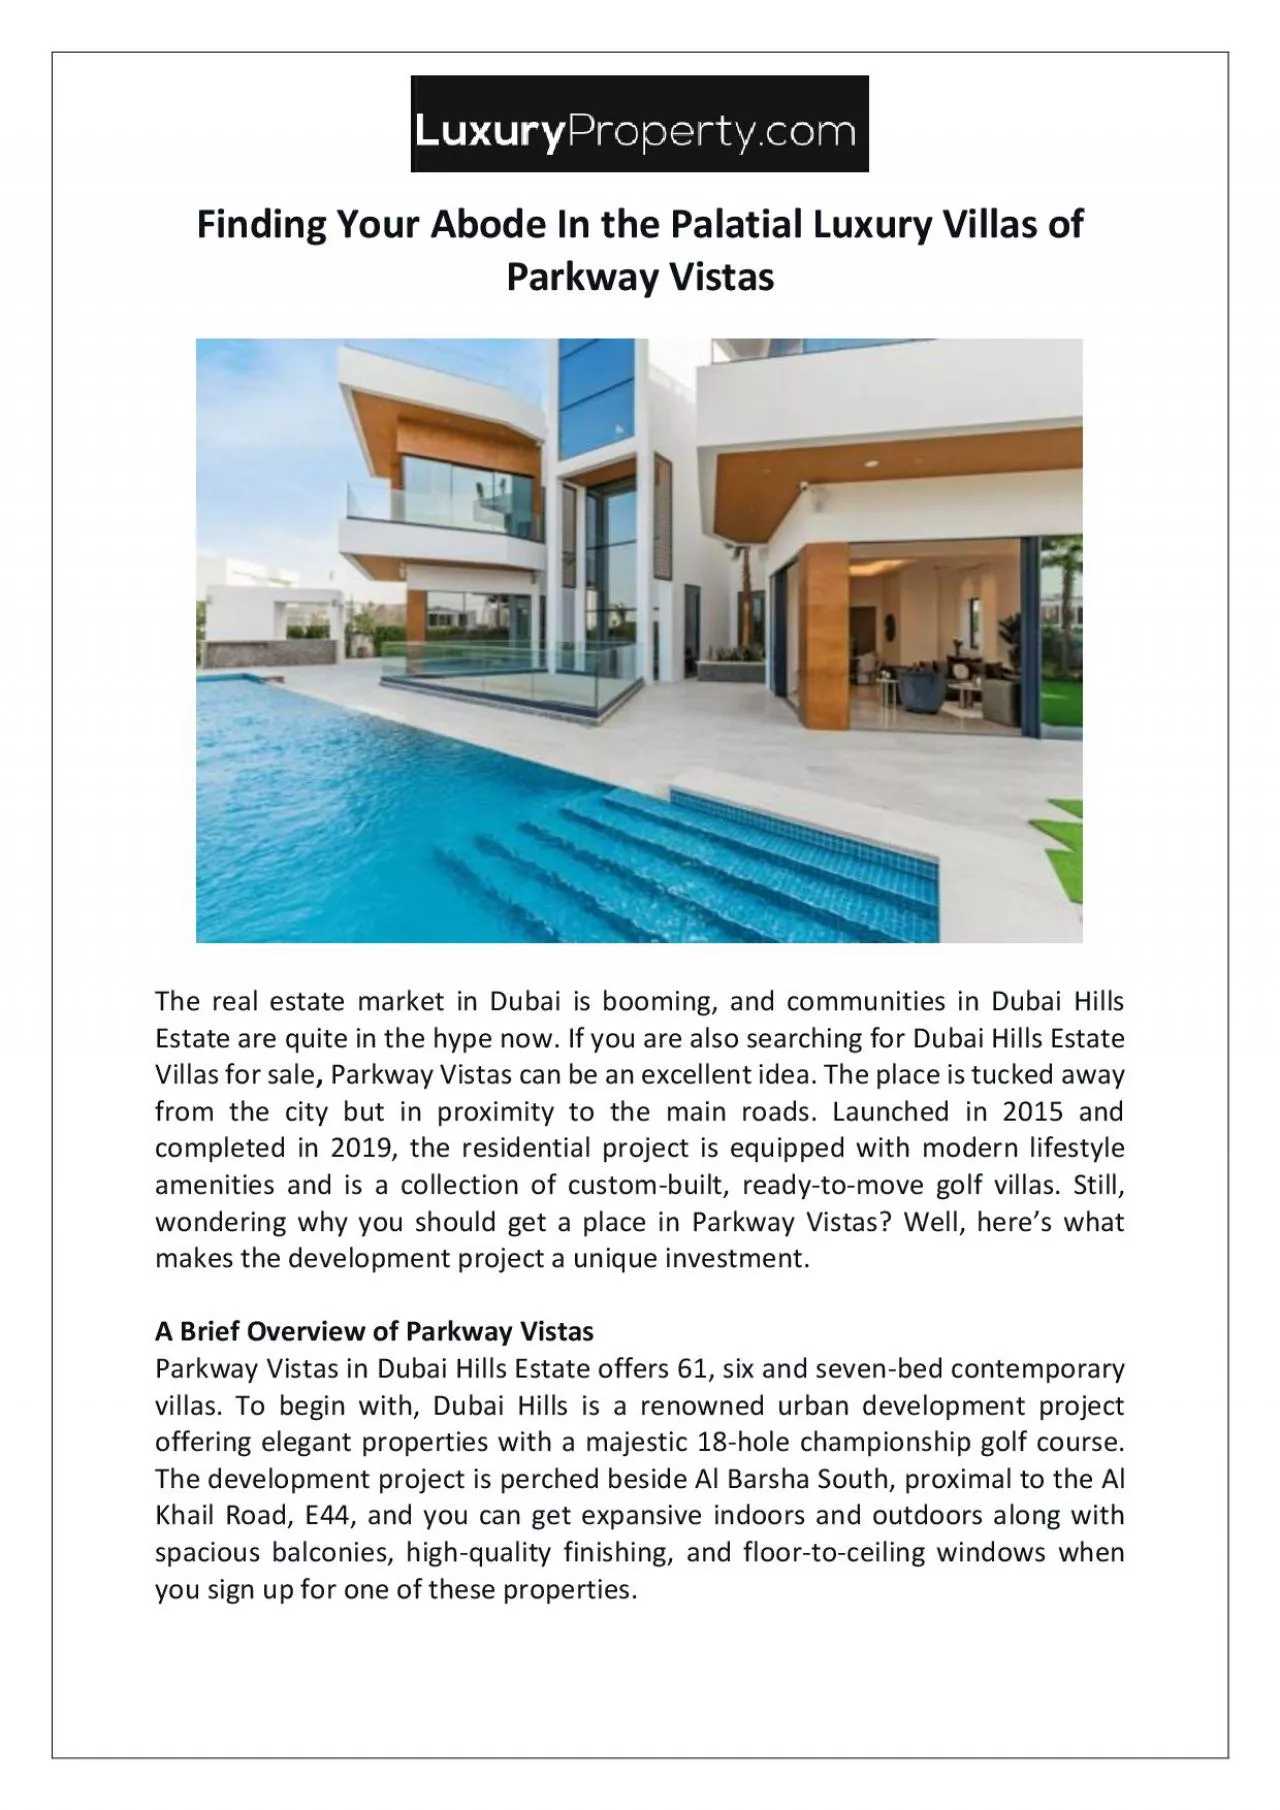 Finding Your Abode In the Palatial Luxury Villas of Parkway Vistas